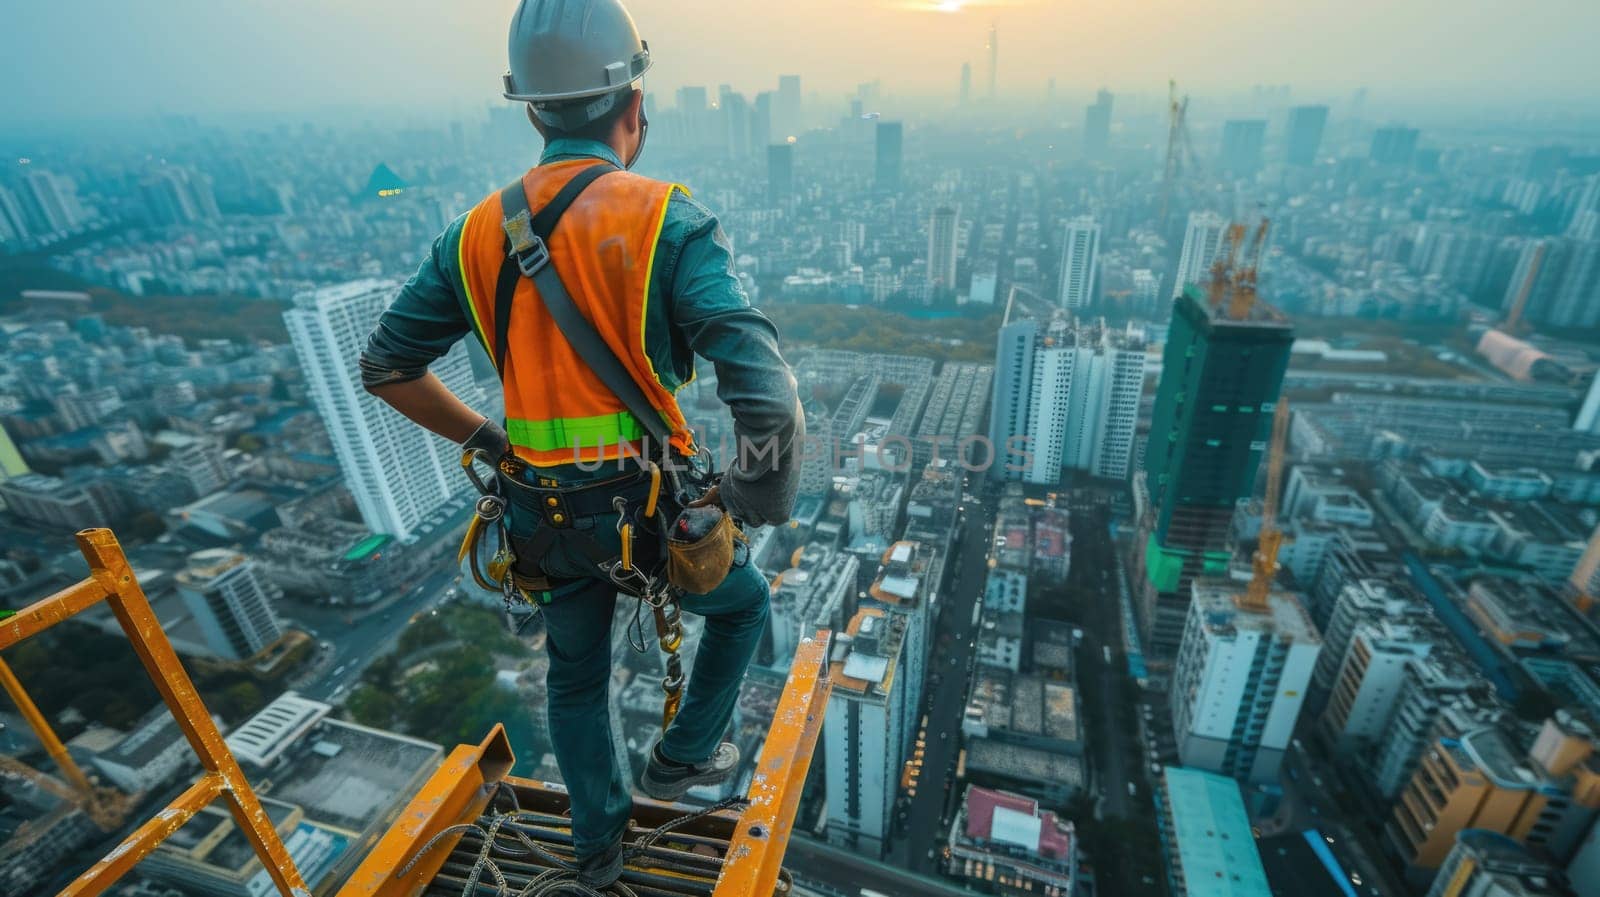 Construction worker admiring cityscape from skyscraper rooftop. AIG41 by biancoblue